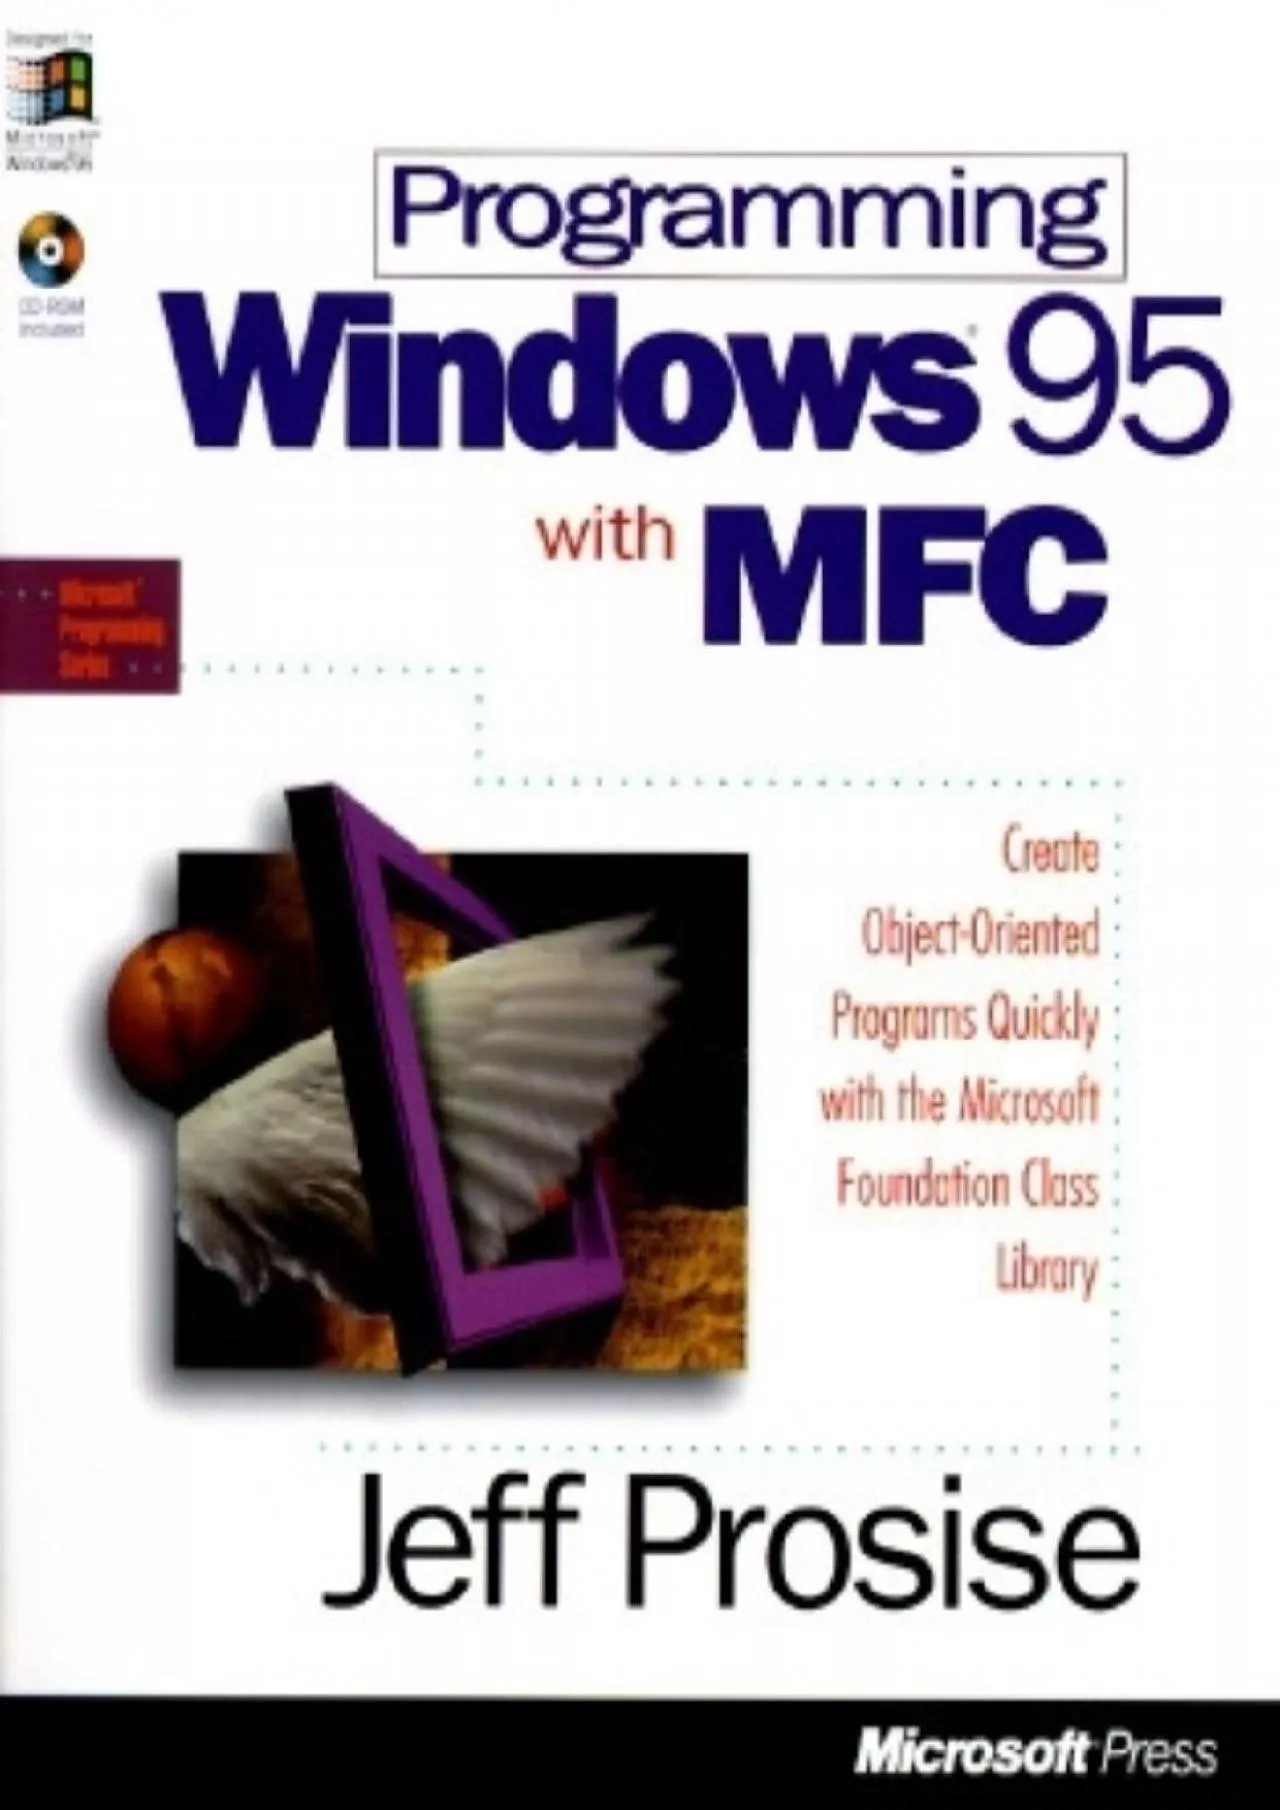 [FREE]-Programming Windows 95 with MFC: Create Programs for Windows Quickly with the Microsoft